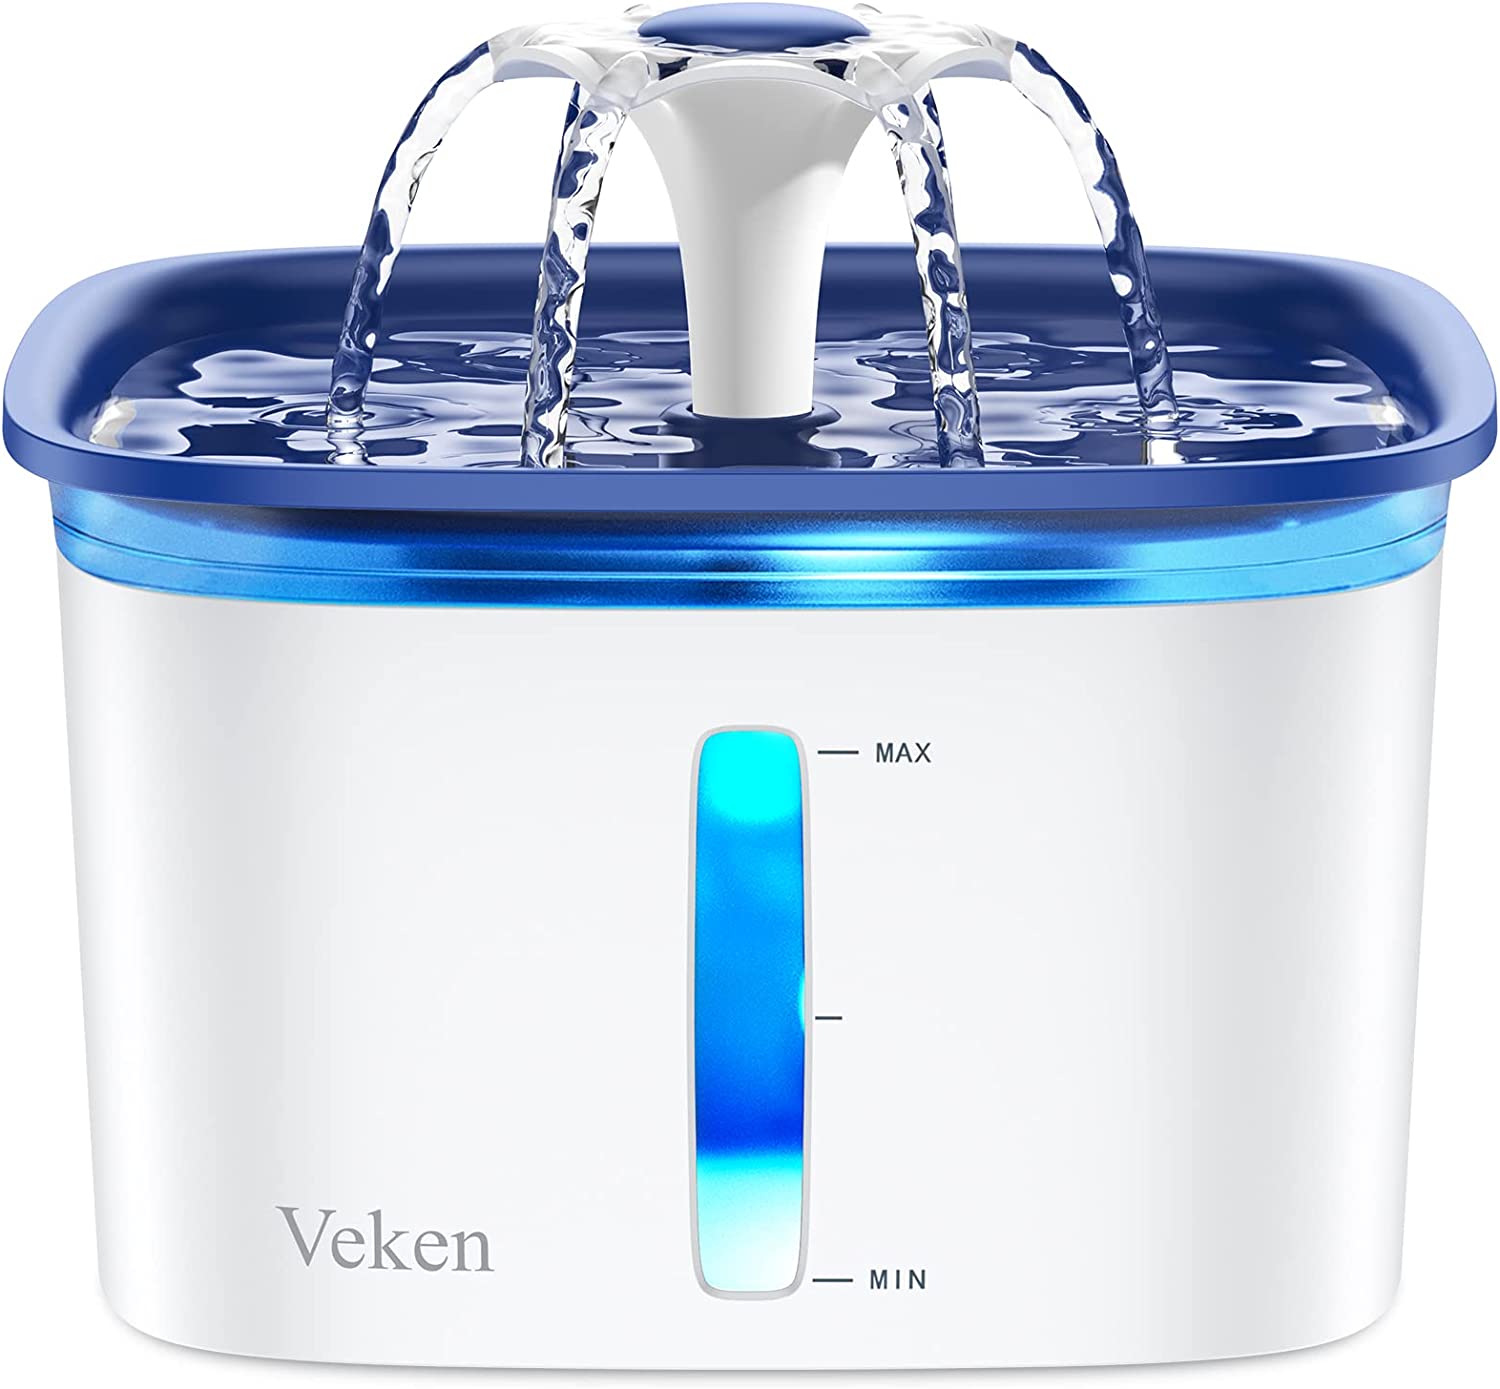 Our Favorite Products for Dog Owners: Veken Pet Fountain